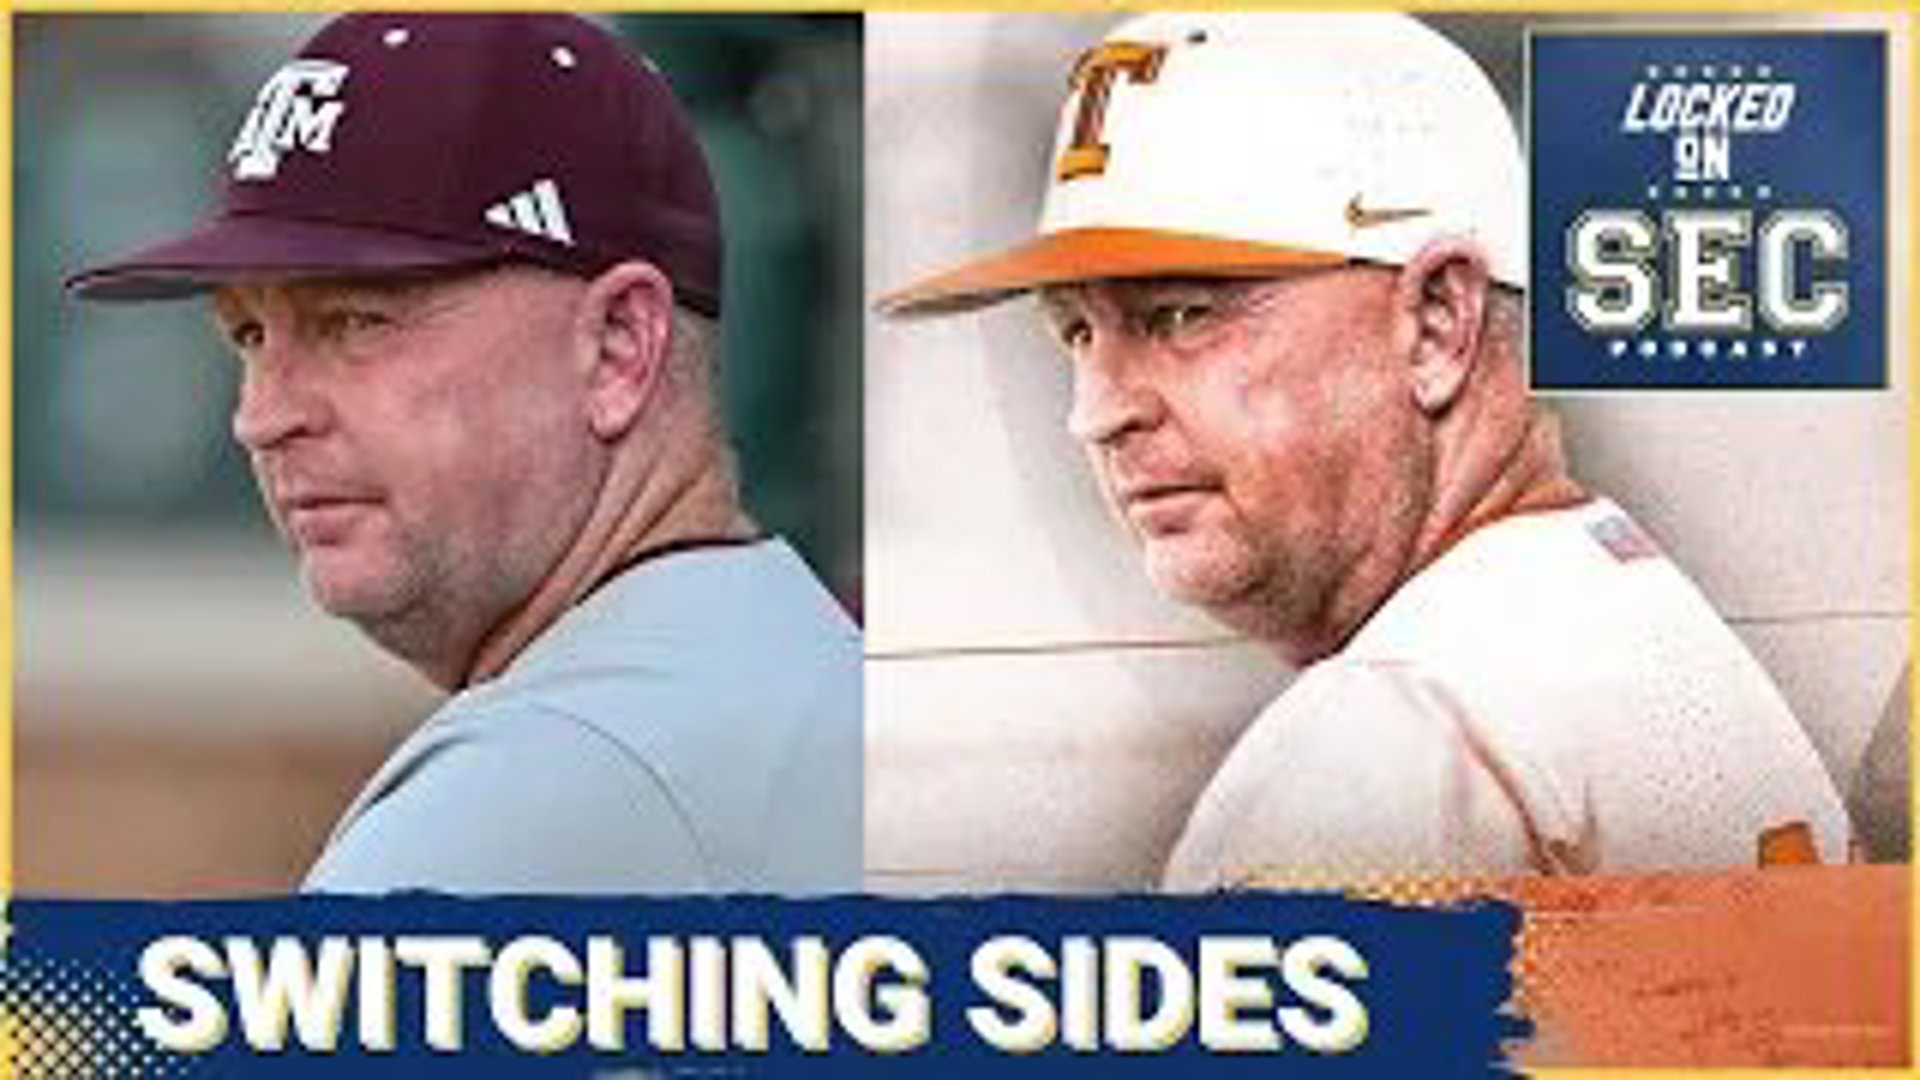 Texas A&M baseball coach Jim Schlossnagle leaves the Aggies for the Texas Longhorns, after coming up short one game in the College World Series on Monday night.